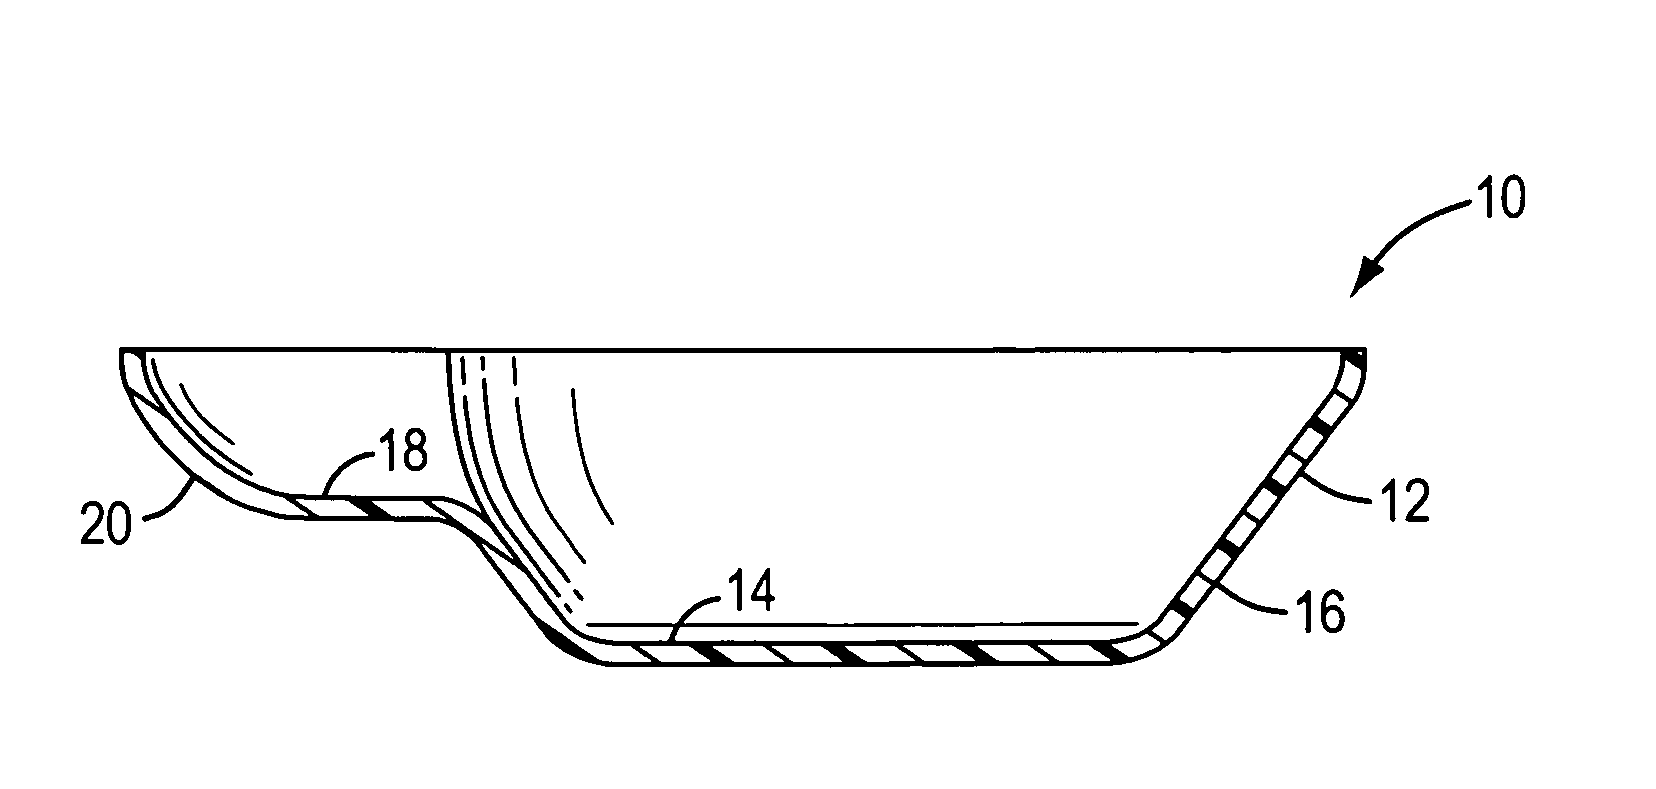 Cereal bowl with elevated trough